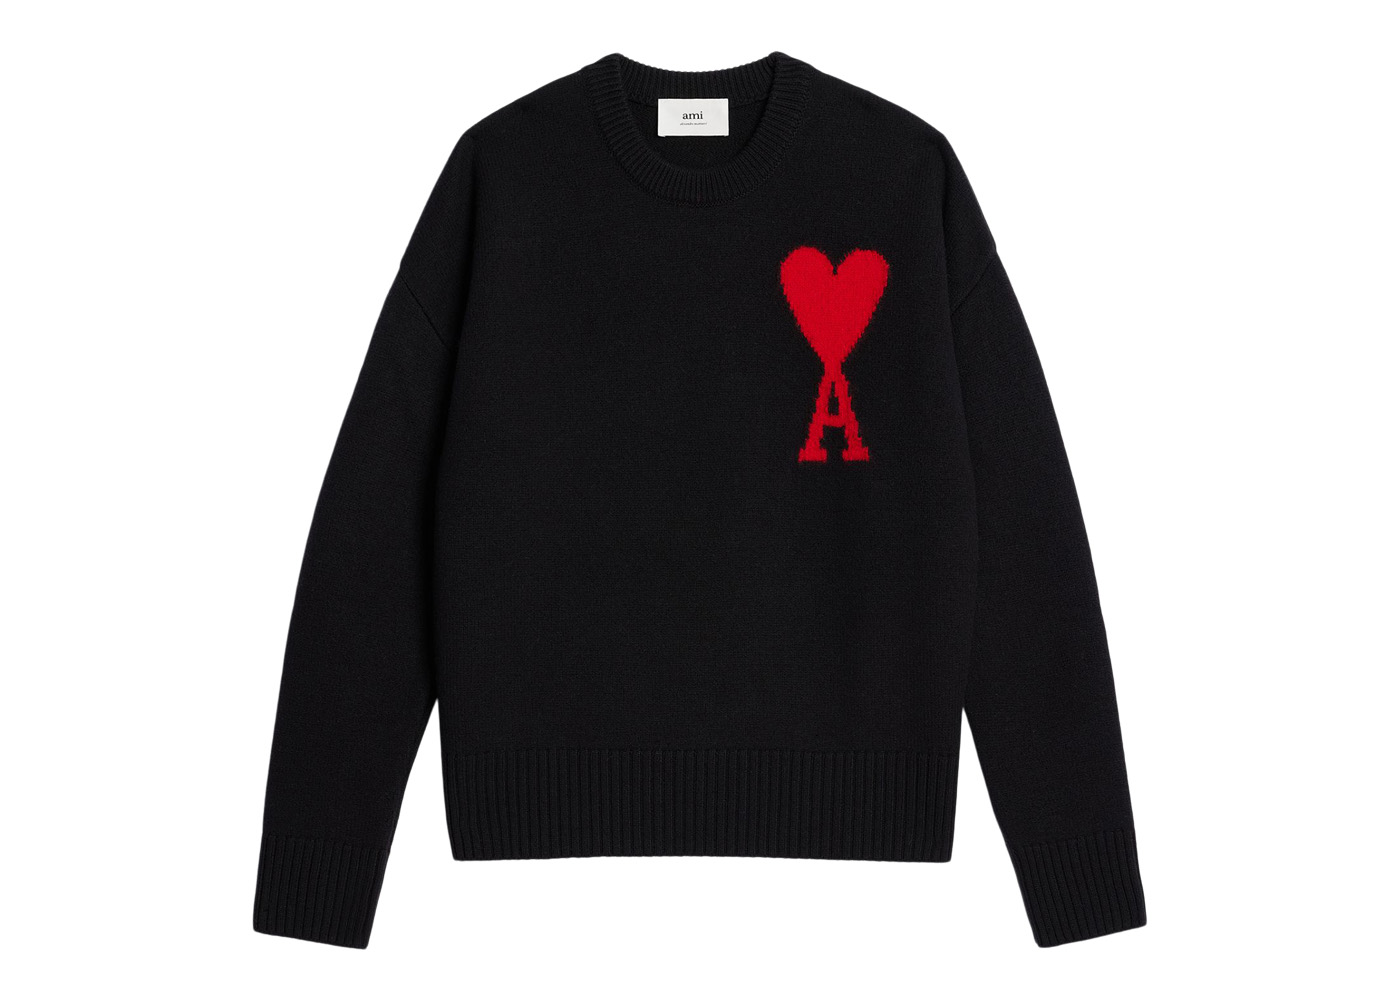 Ami Paris Ami De Coeur Intarsia-knitted Felted Merino Wool Crewneck  Oversized Sweater Black/Red